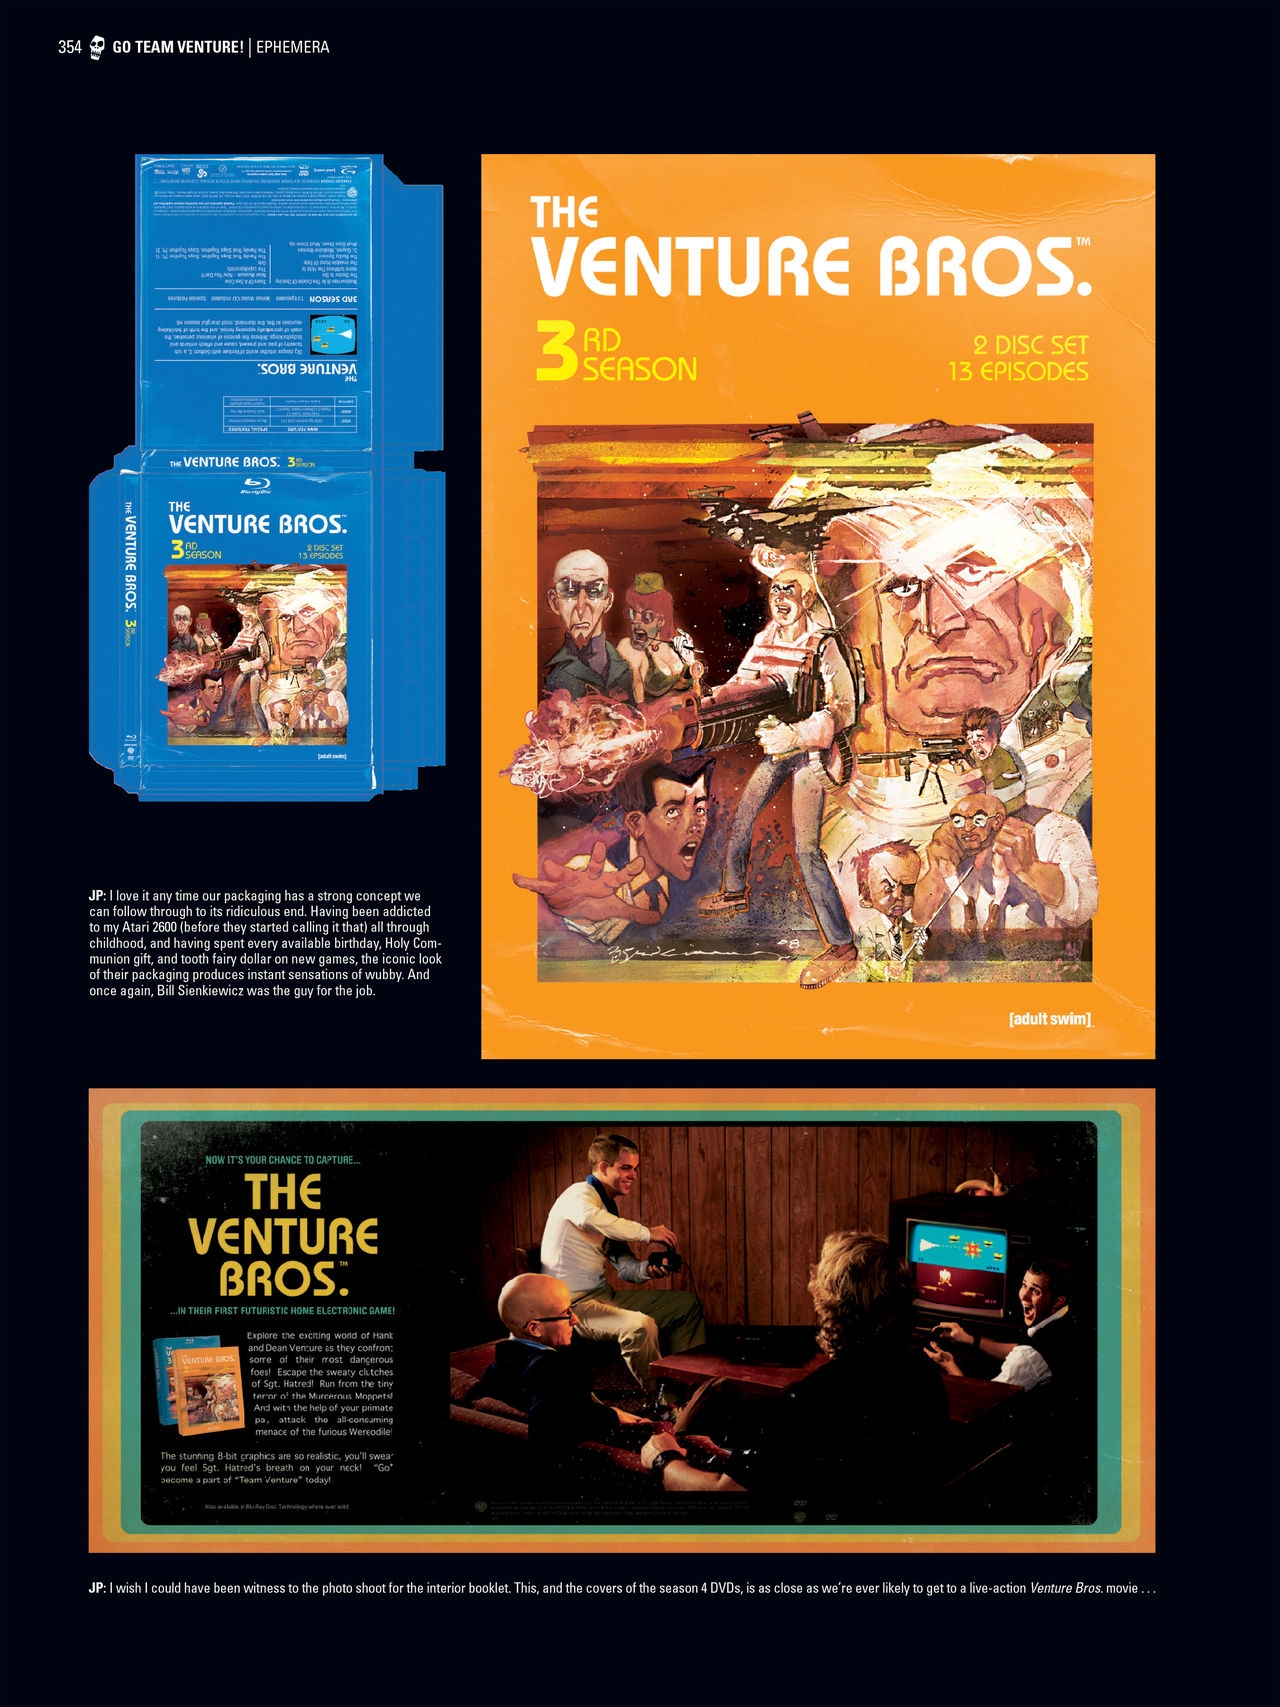 Go Team Venture! - The Art and Making of the Venture Bros 351